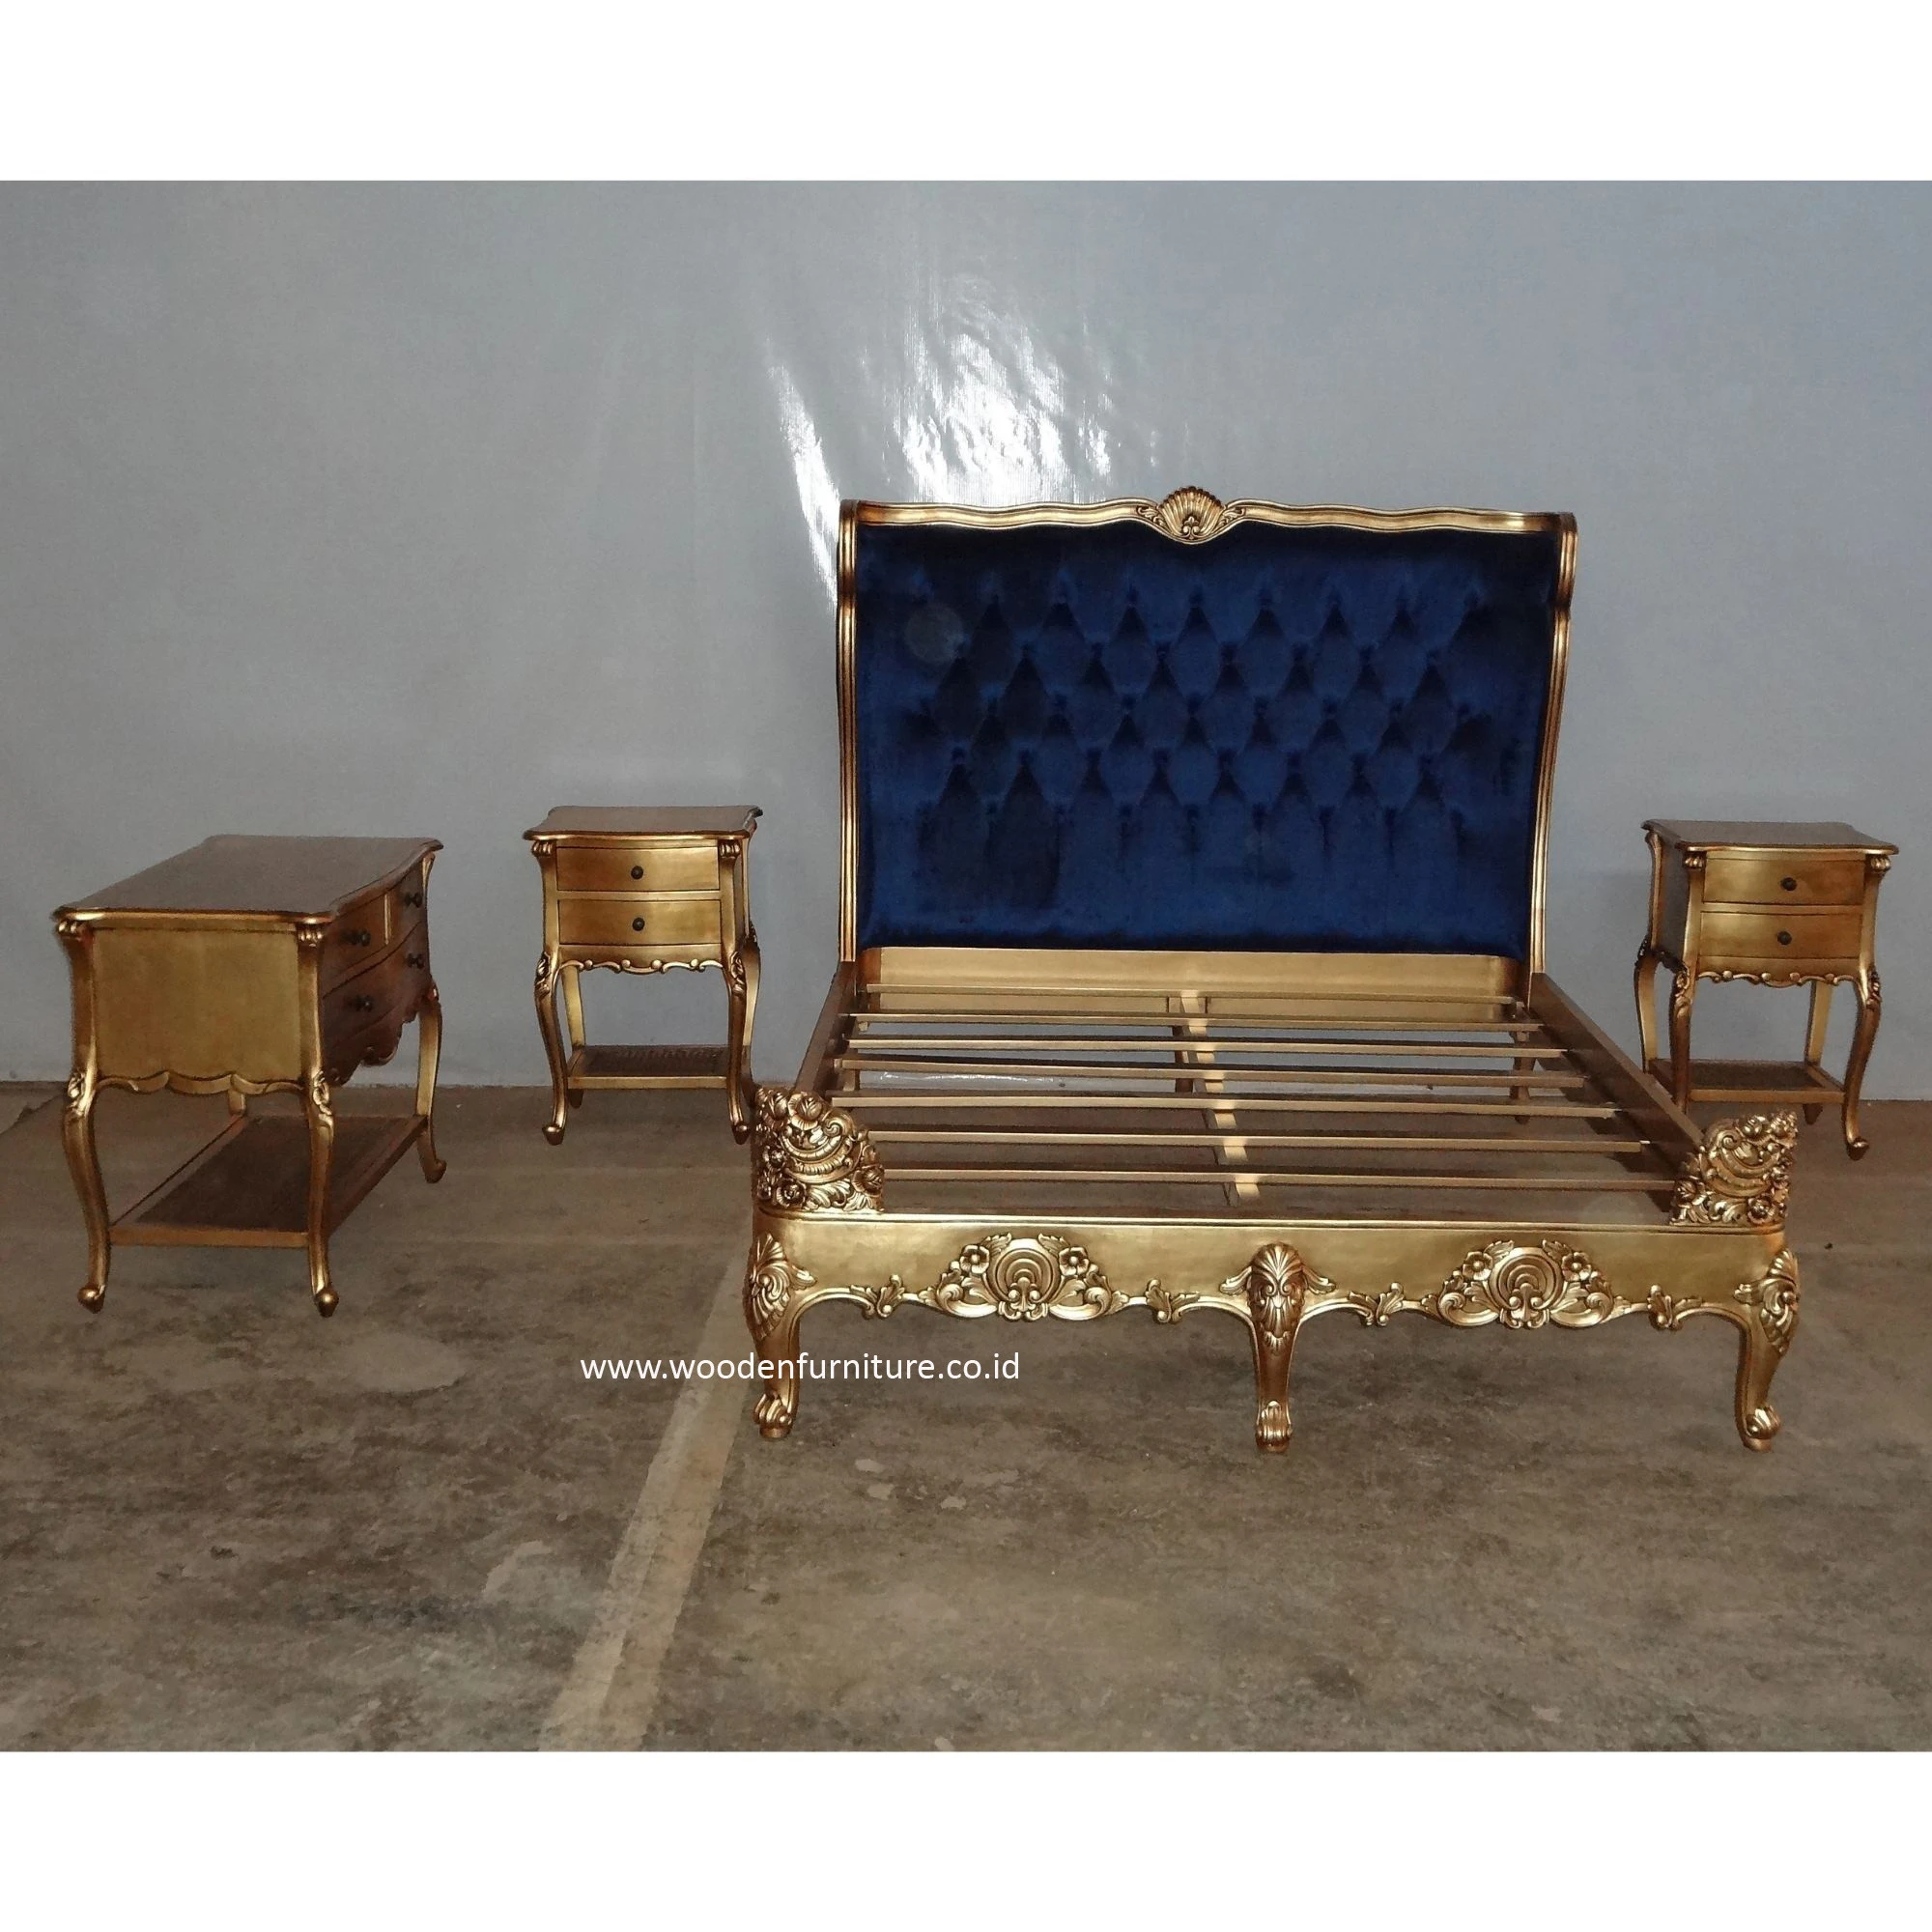 Luxury Italian Bed Set Antique Reproduction Bed Frame French Provincial Gilded Bedroom Furniture European Style Home Furniture